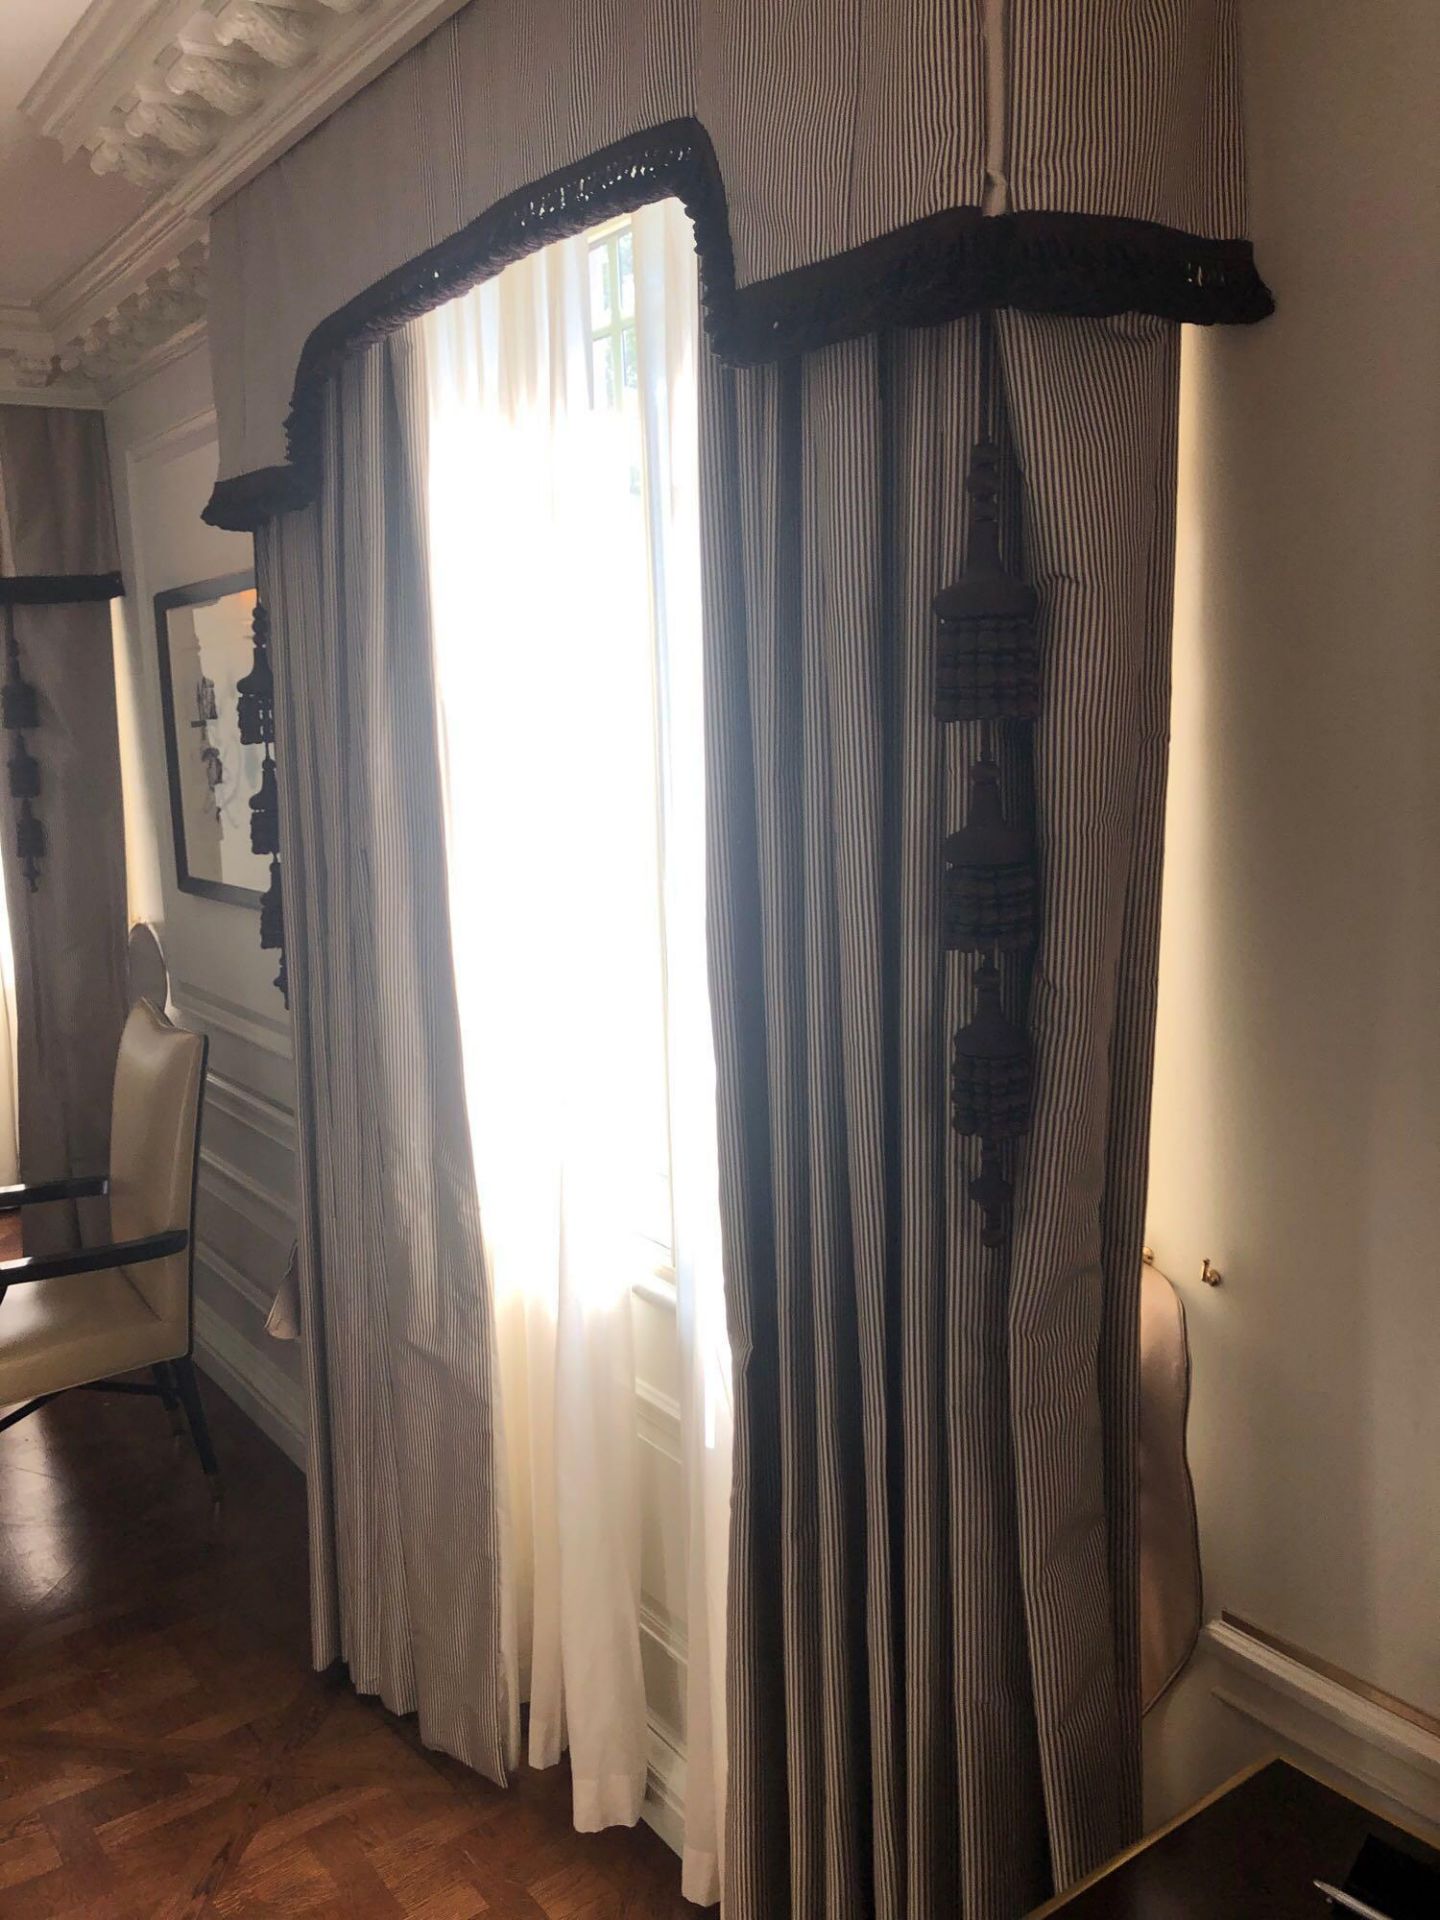 A Pair Of Luxury Drapes Grey And White Striped With Tassel Trim And Pelmet 250 x 153cm (Room 206/7)